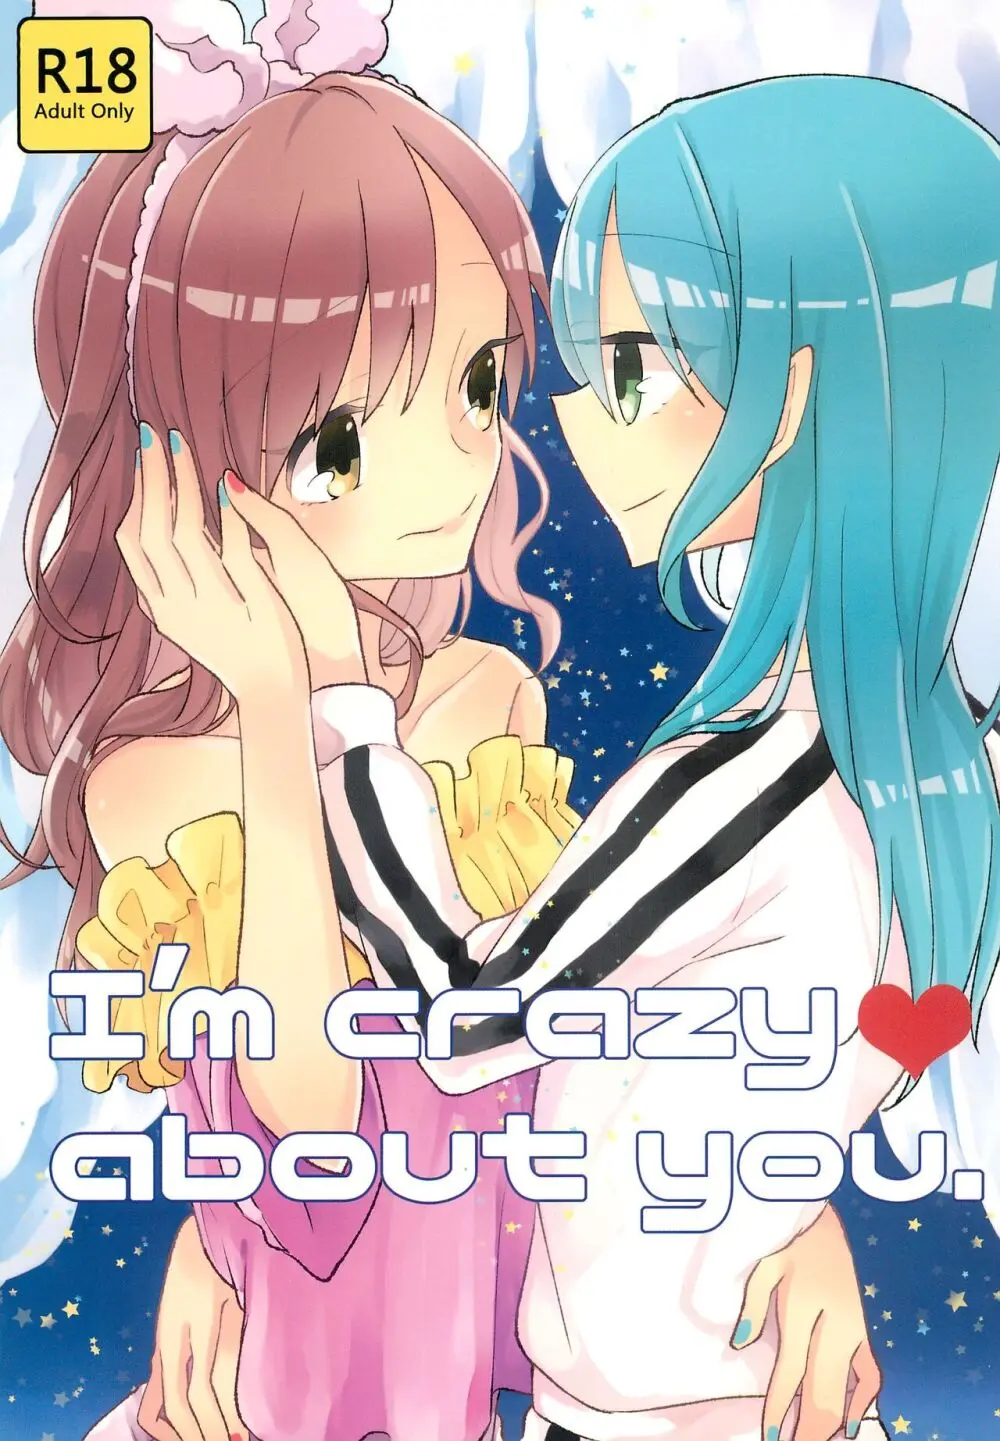 I’m crazy about you.